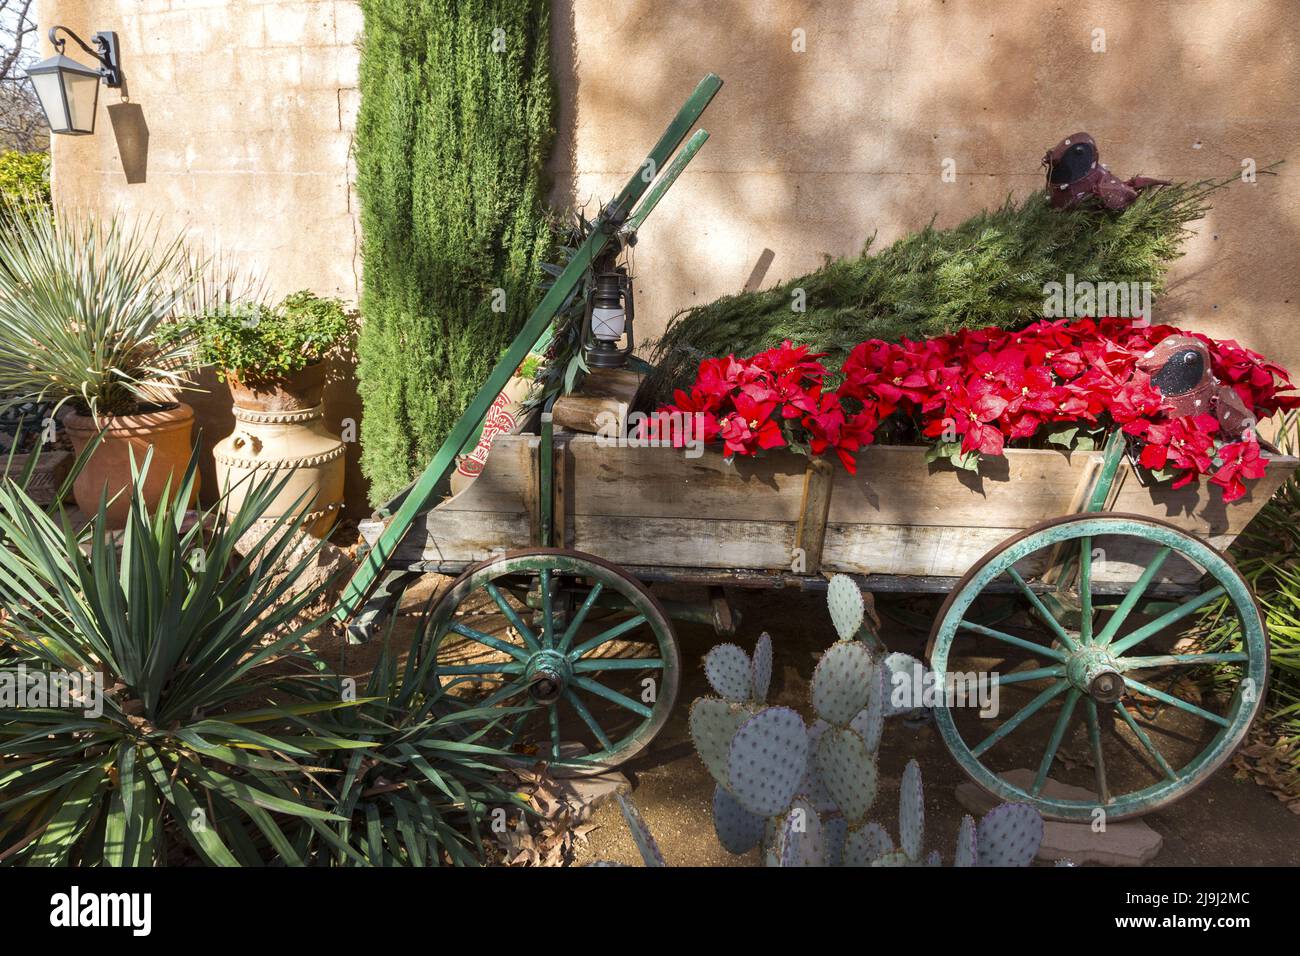 Vintage Horsedrawn Wooden Horse Flower Cart with Red Flowers Green Cactus Plant Detall. Tlaquepaque Spanish Arts Crafts Village, Sedona Arizona USA Stock Photo